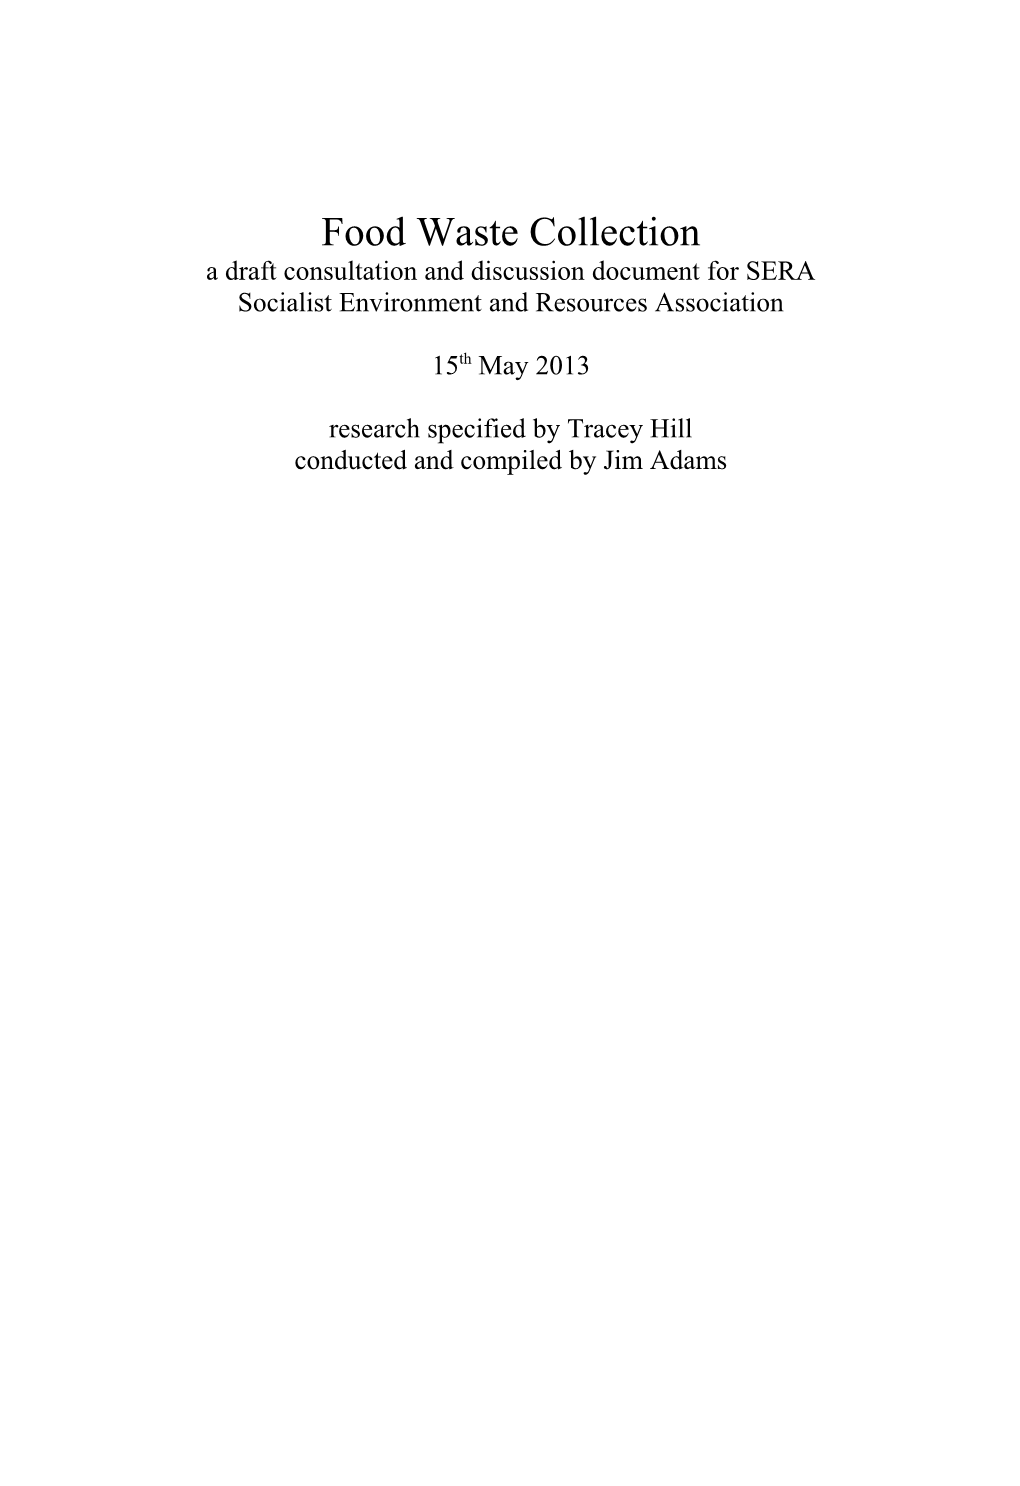 A Draft Consultation and Discussion Document for SERA